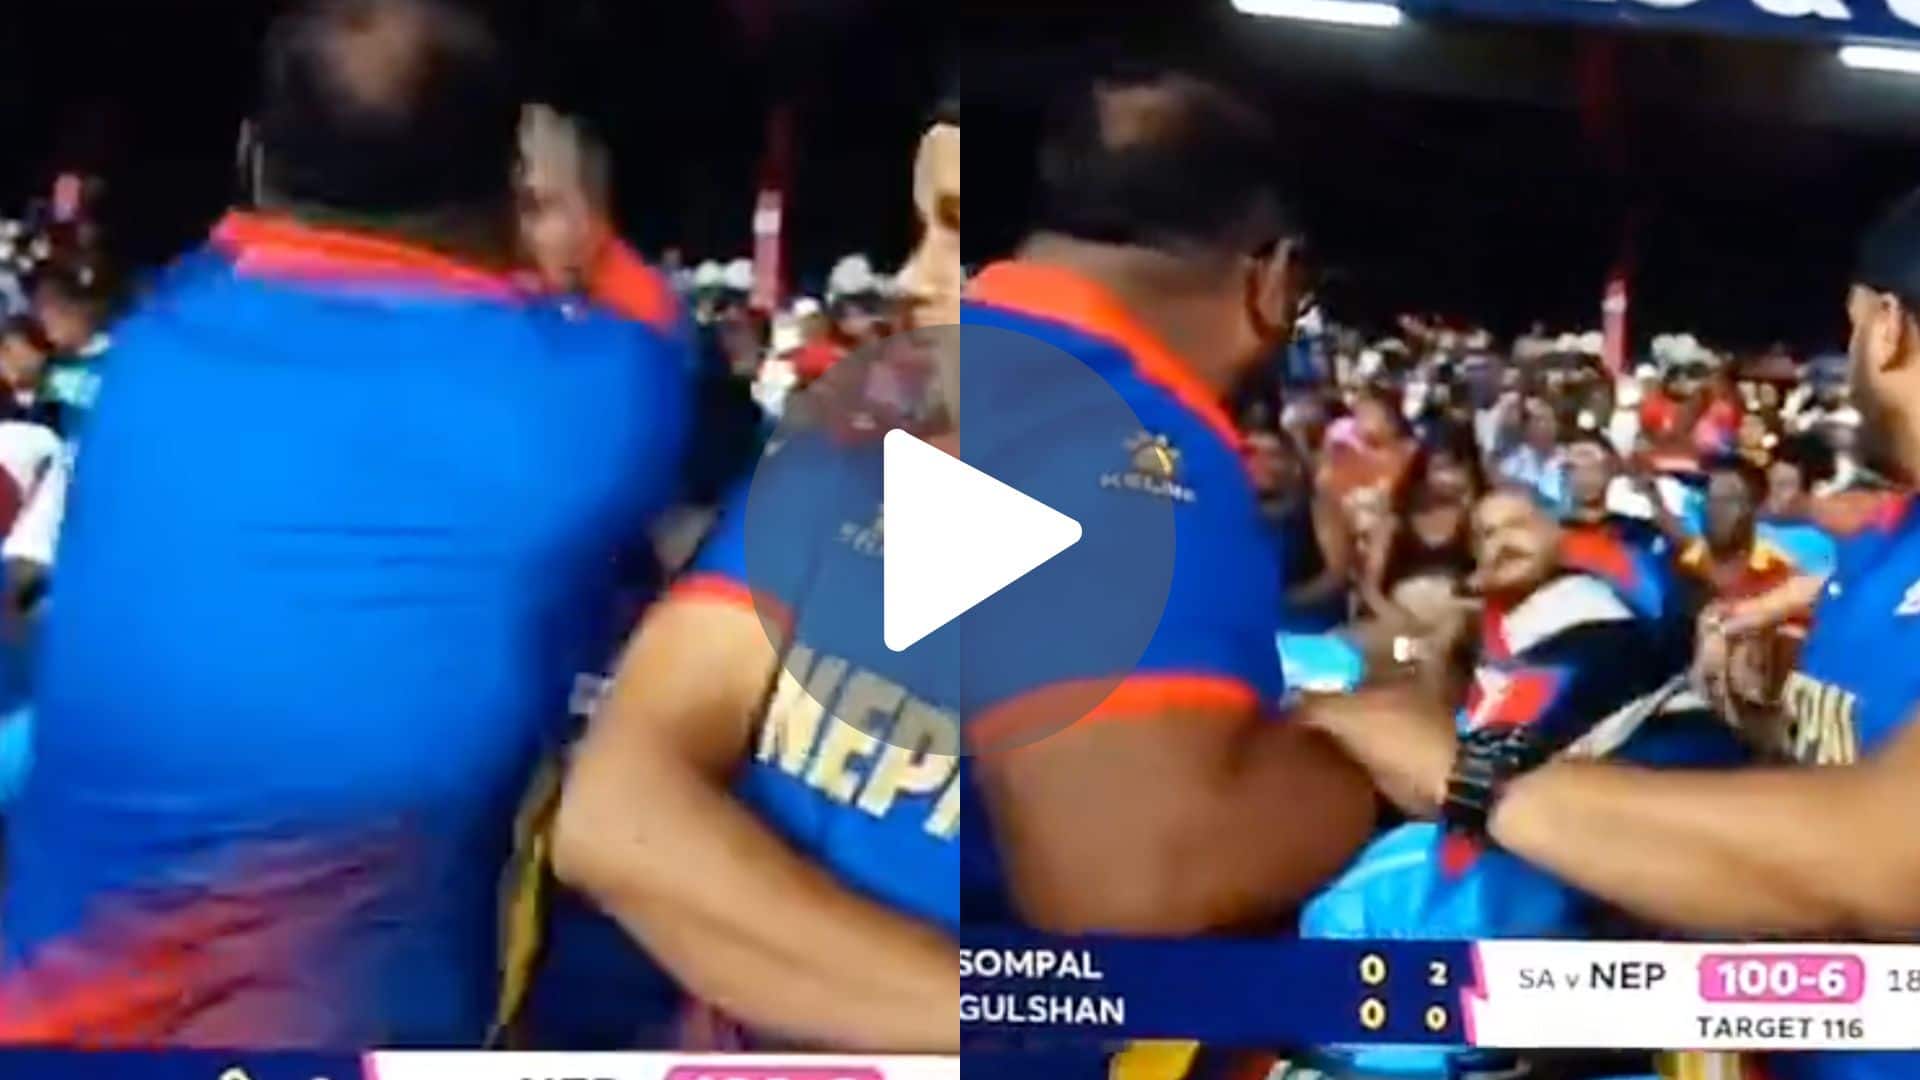 [Watch] Nepal Fans' Fight Goes Viral Amid Team's Heartbreaking 1-Run Loss To SA